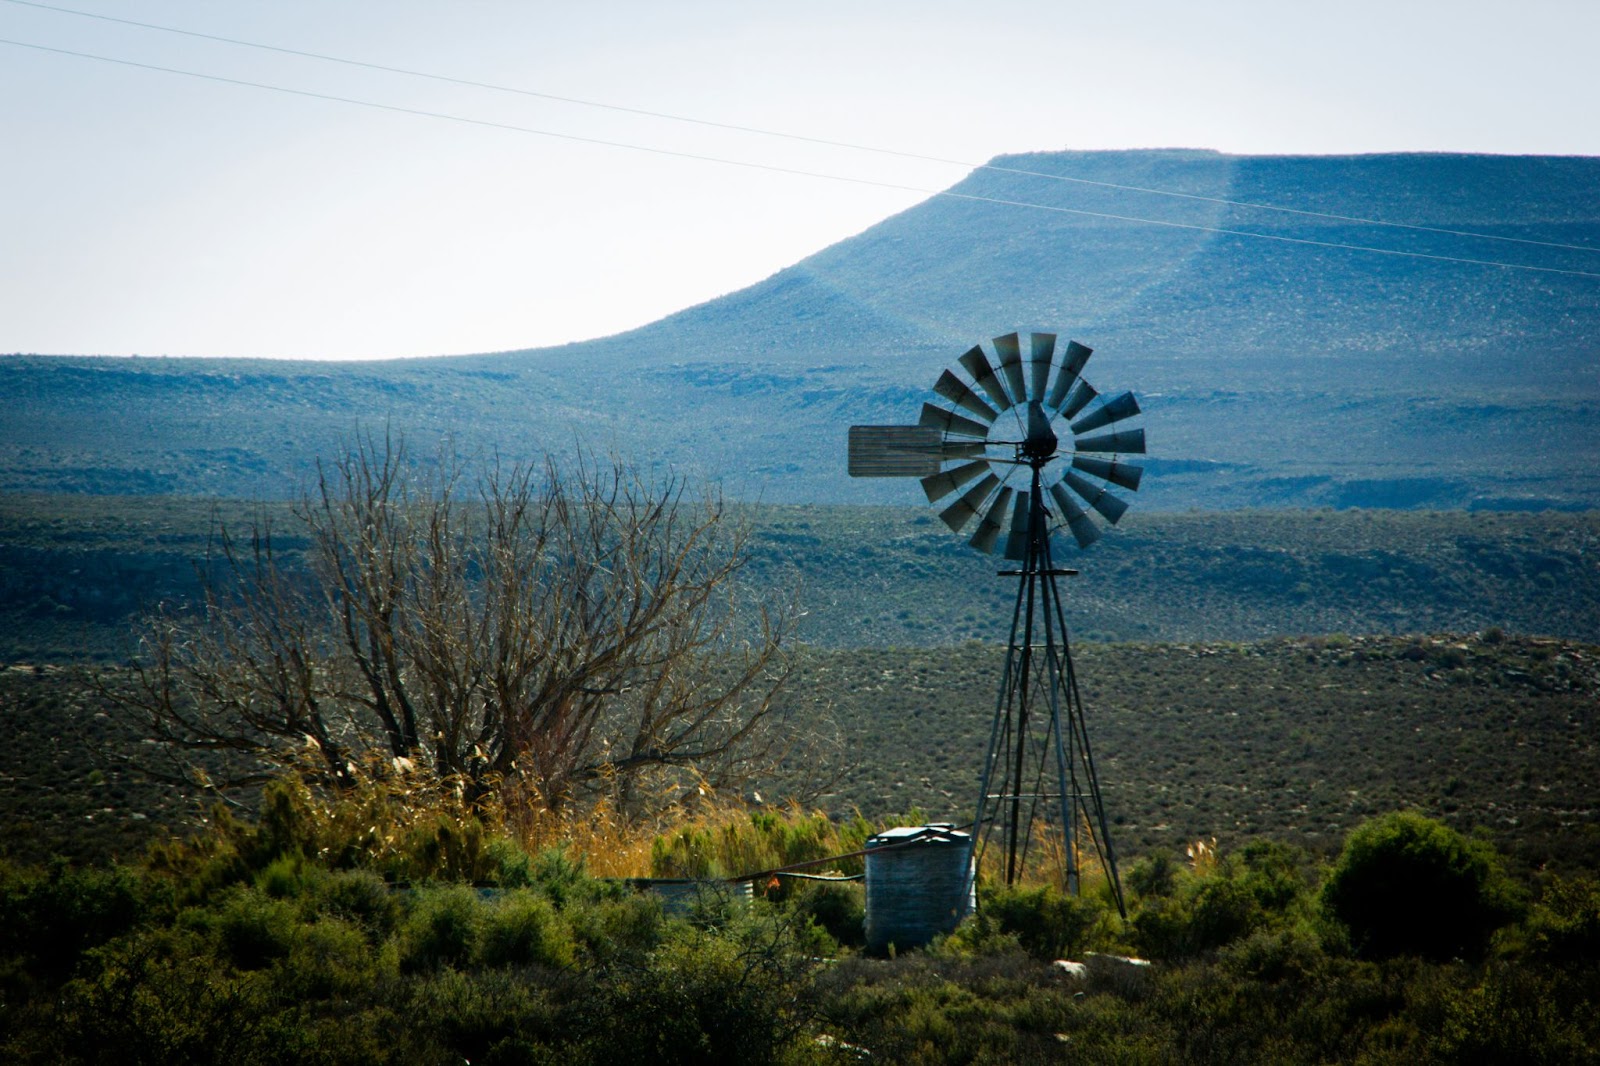 A popular icon of the Karoo region, the windmill